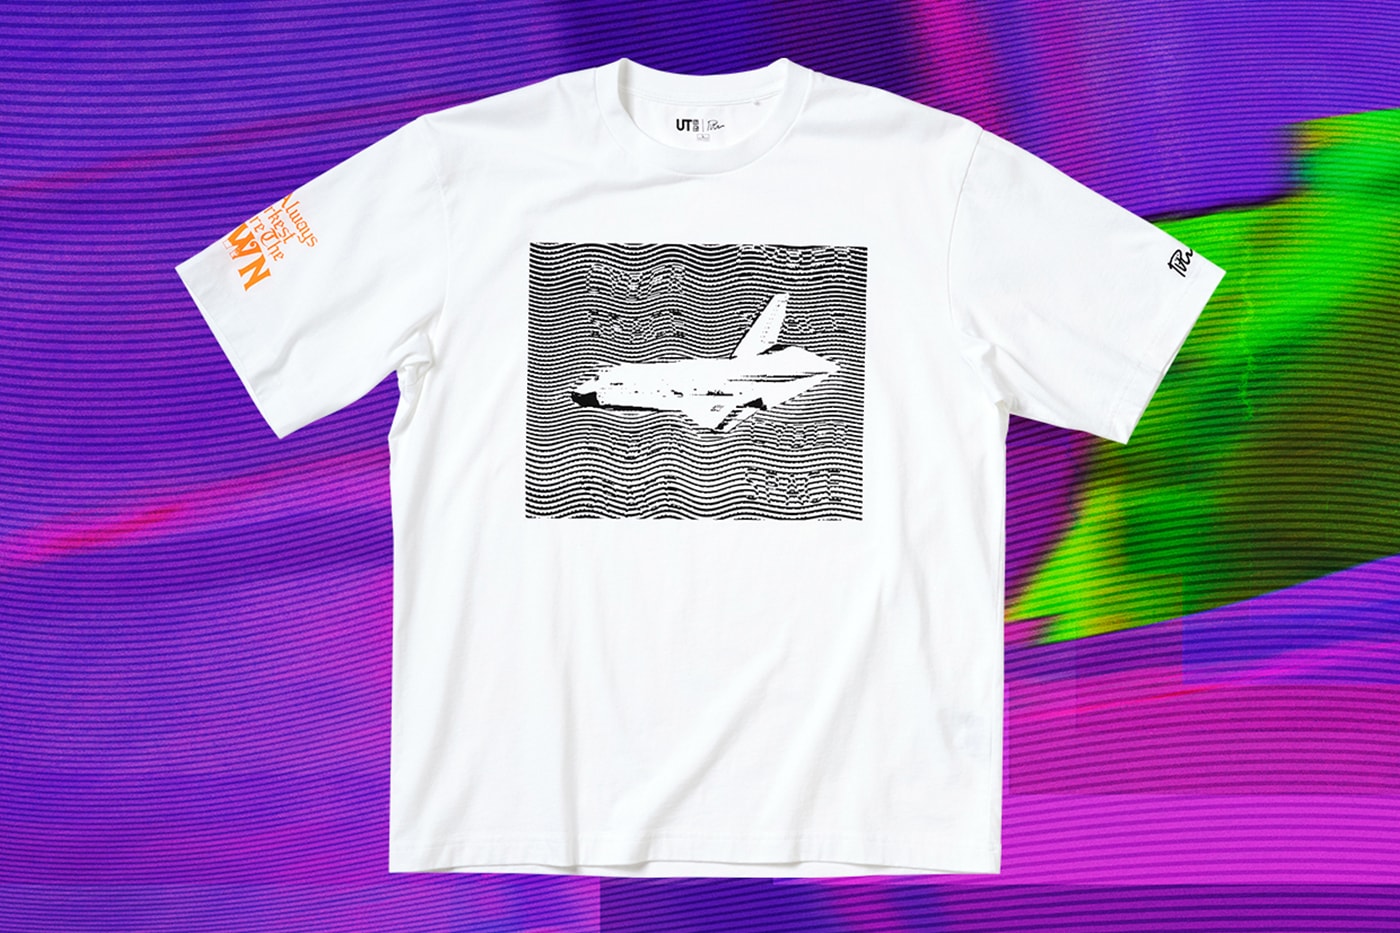 Fergus Purcell UNIQLO UT Collection Release Info Palace Skateboards T-shirt 